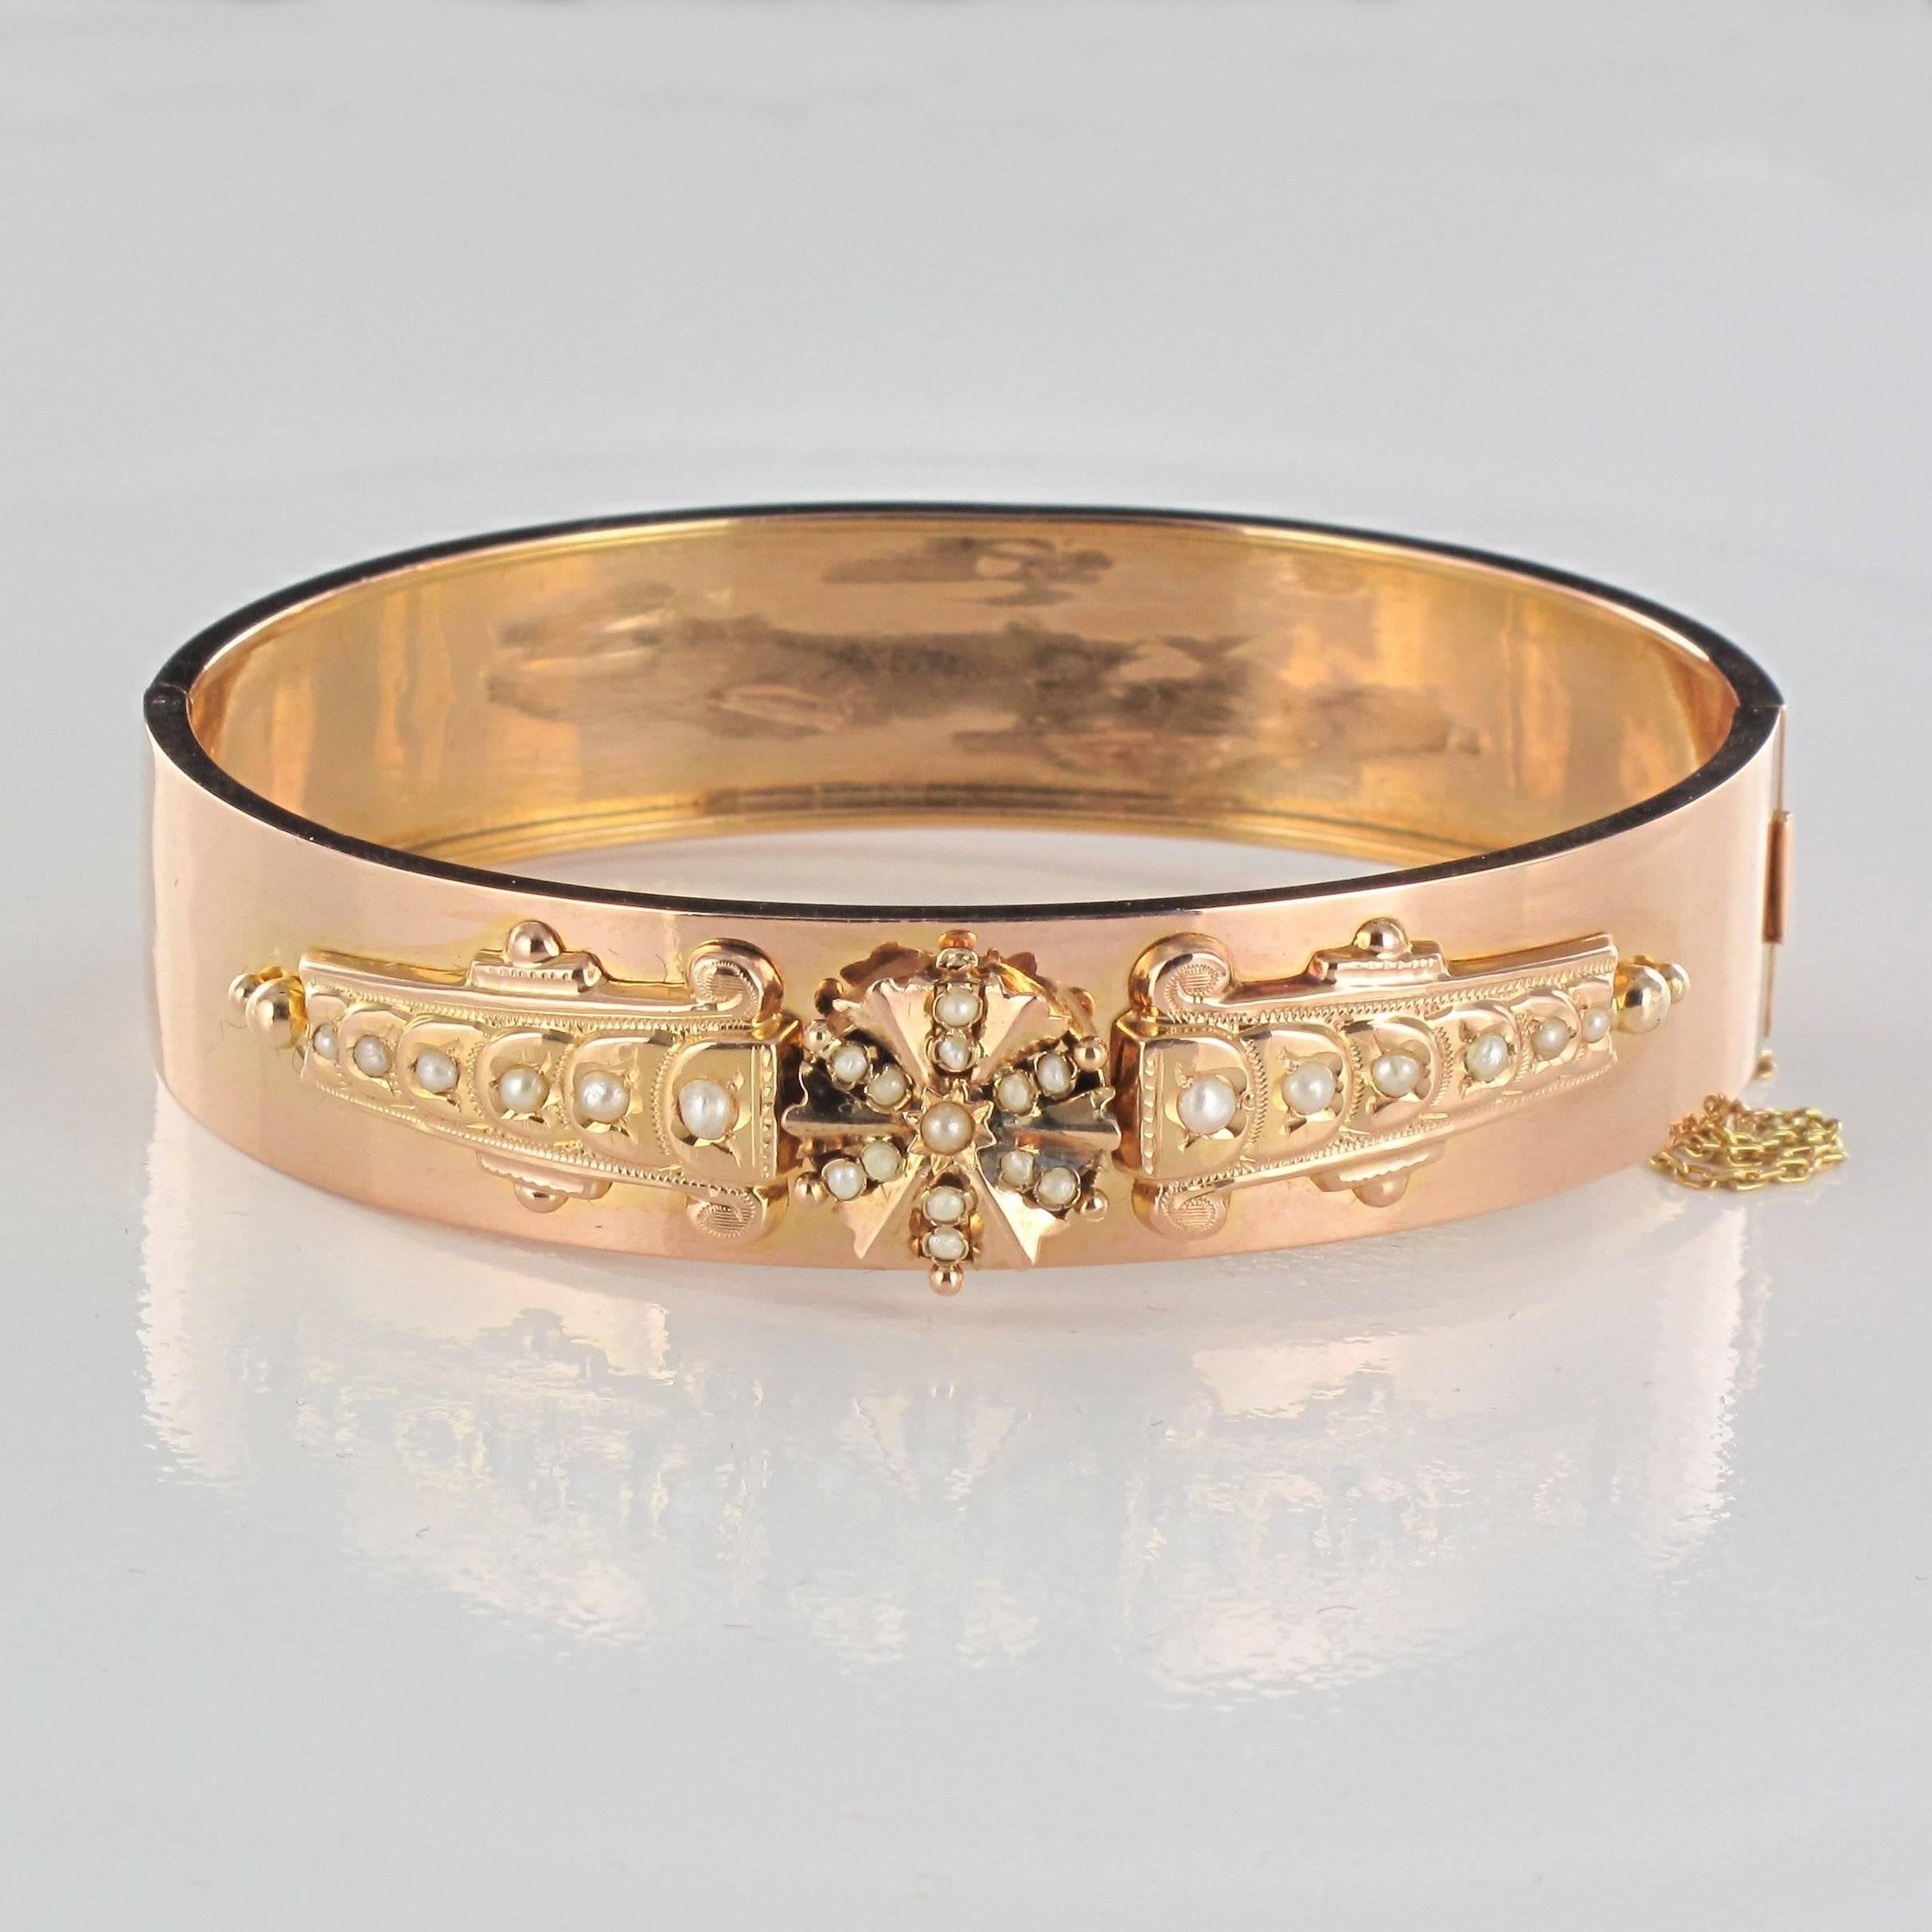 Bracelet in 18 carat rose gold 750 thousandths, eagle head hallmark.

Half oval ring, it is set on its top in aplique of a decoration set with half fine pearls. It opens with a ratchet hinge on the side and has a safety chain.

Circumference: